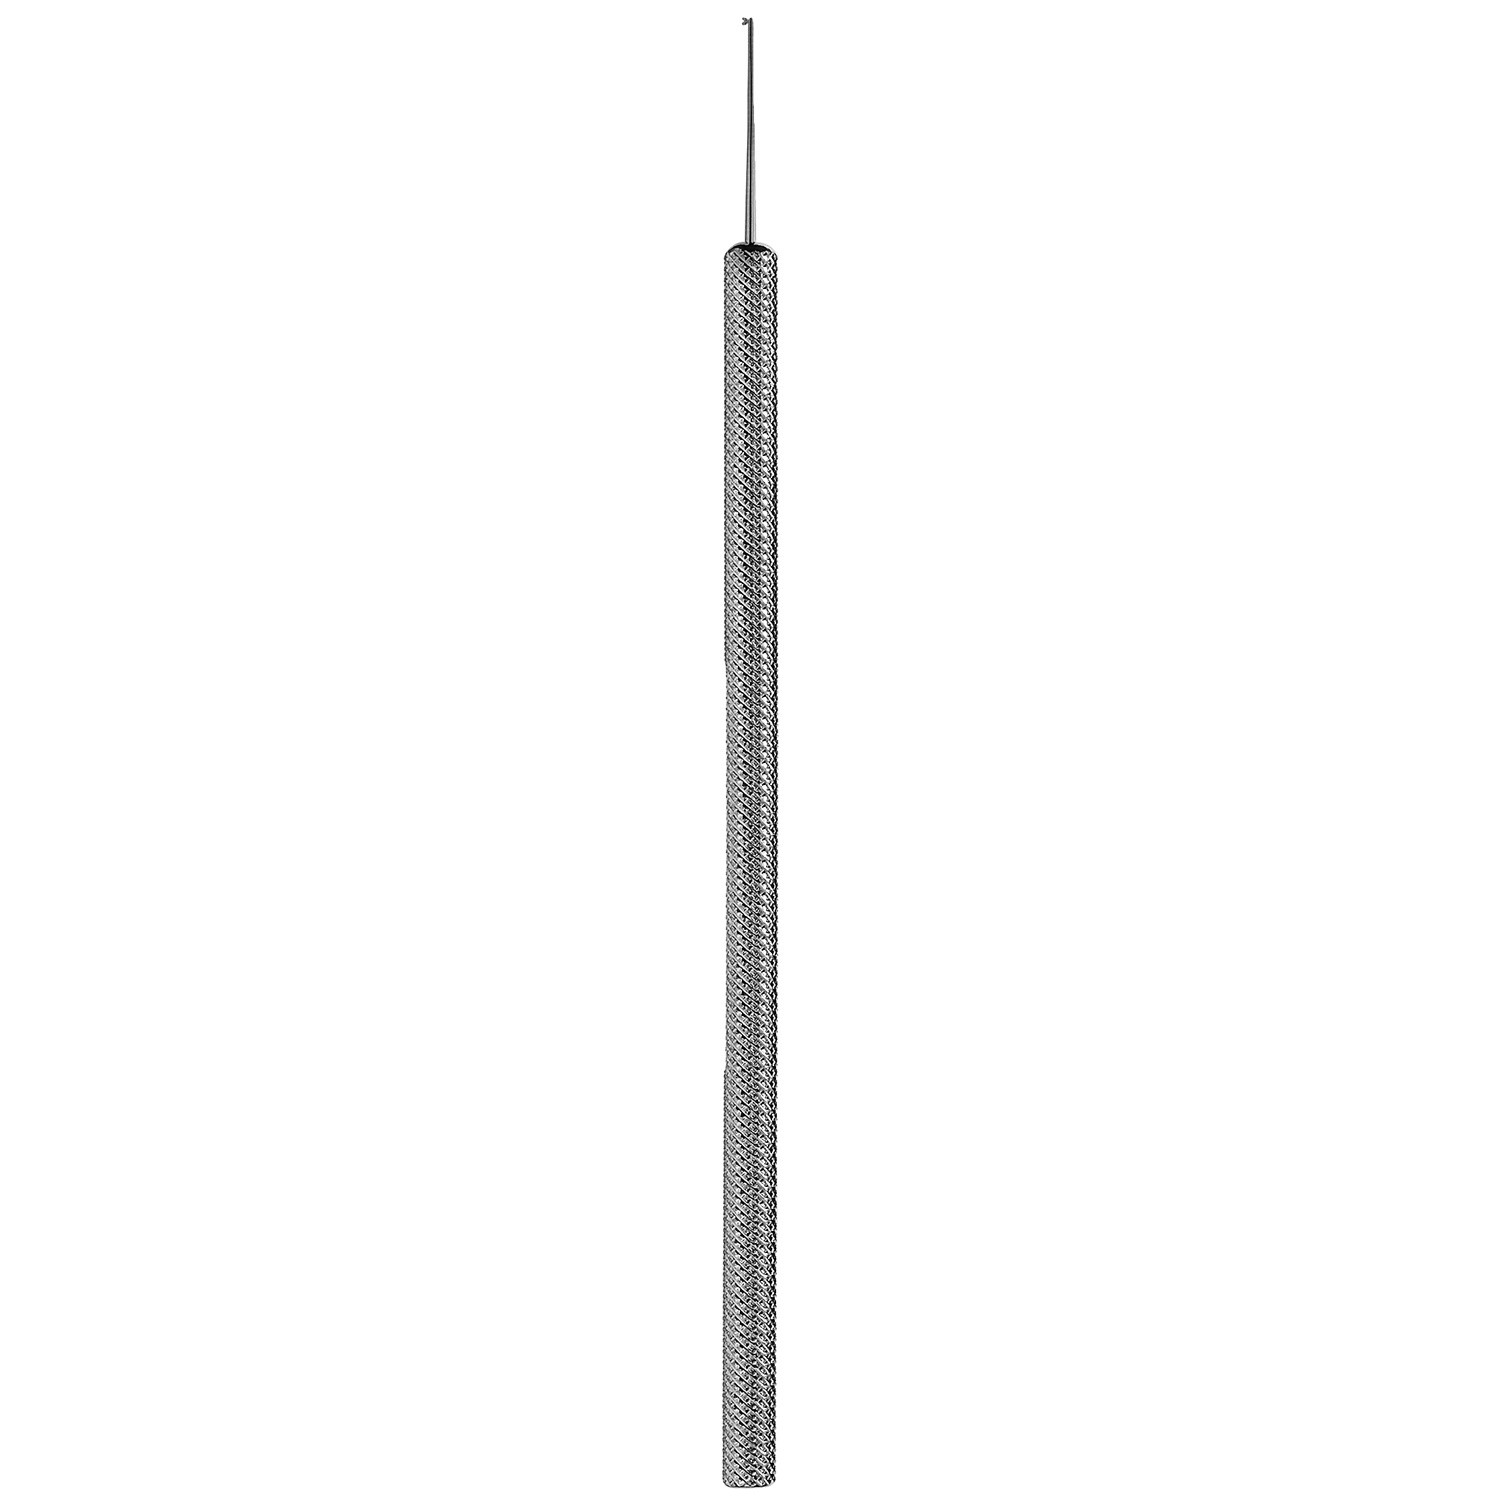 Osher Nucleus Manipulator, Smaller Than 60-1313, 0.5 Mm Two-Prong Tip, Blunt, 4 1/2" (11.5 Cm)